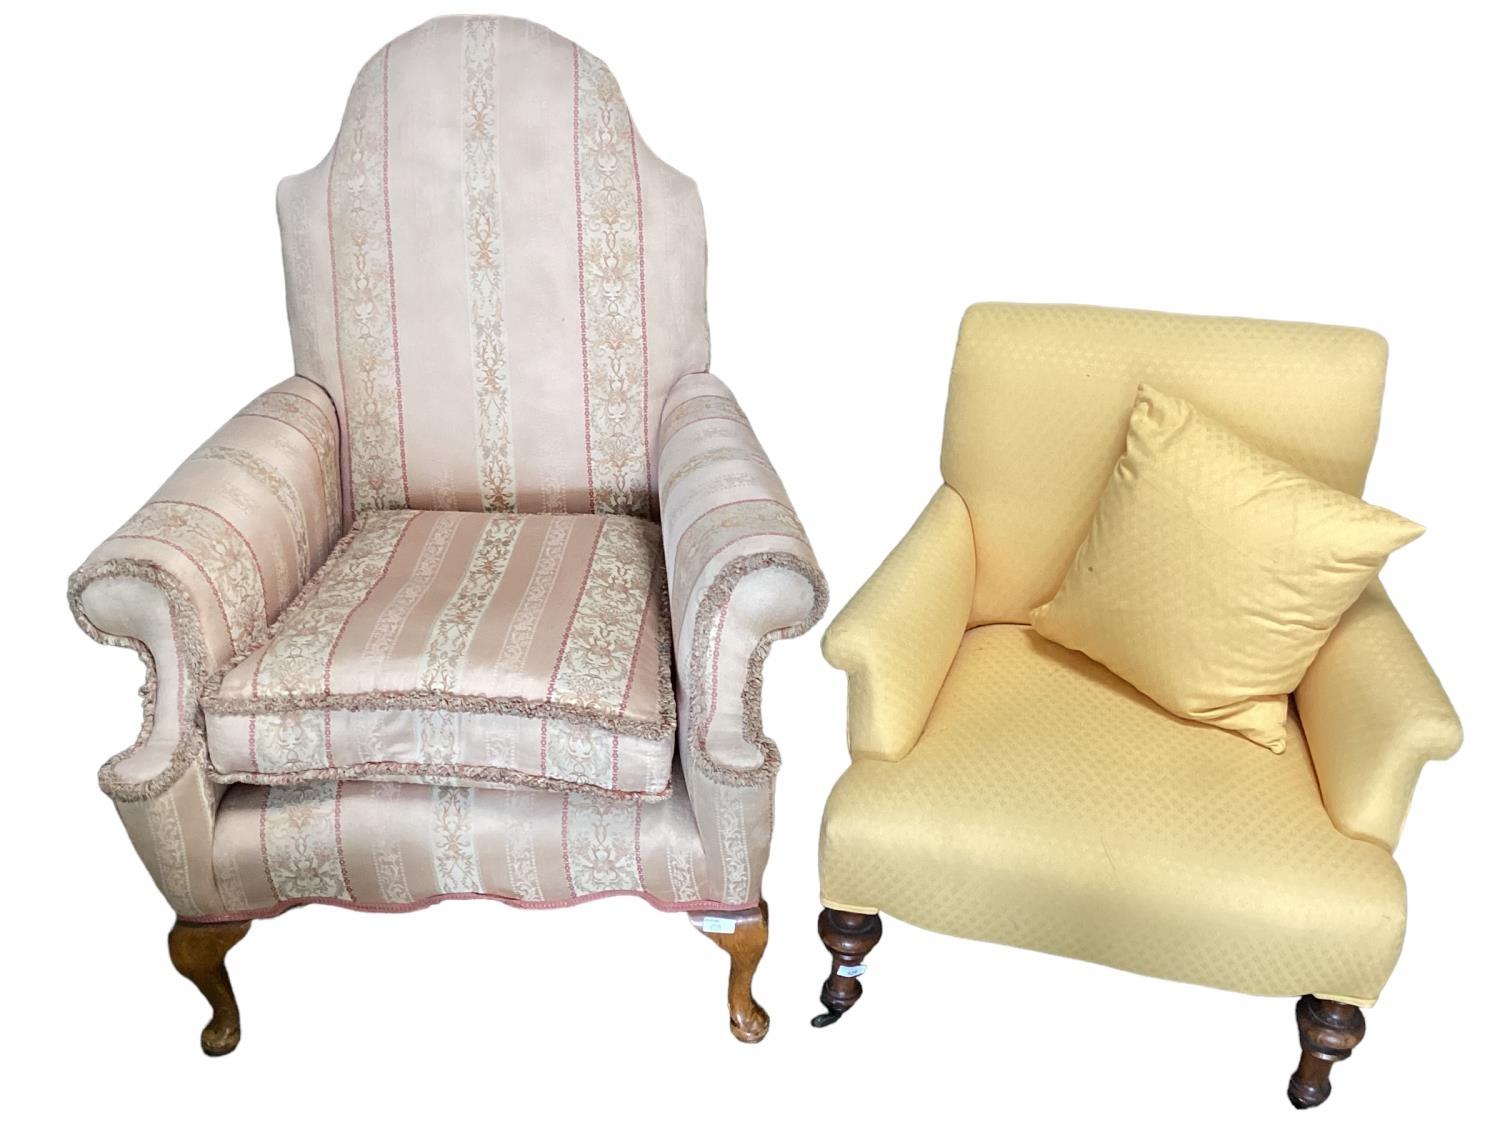 A small yellow upholstered bedroom chair, on turned feet to castors, and another upholstered arm